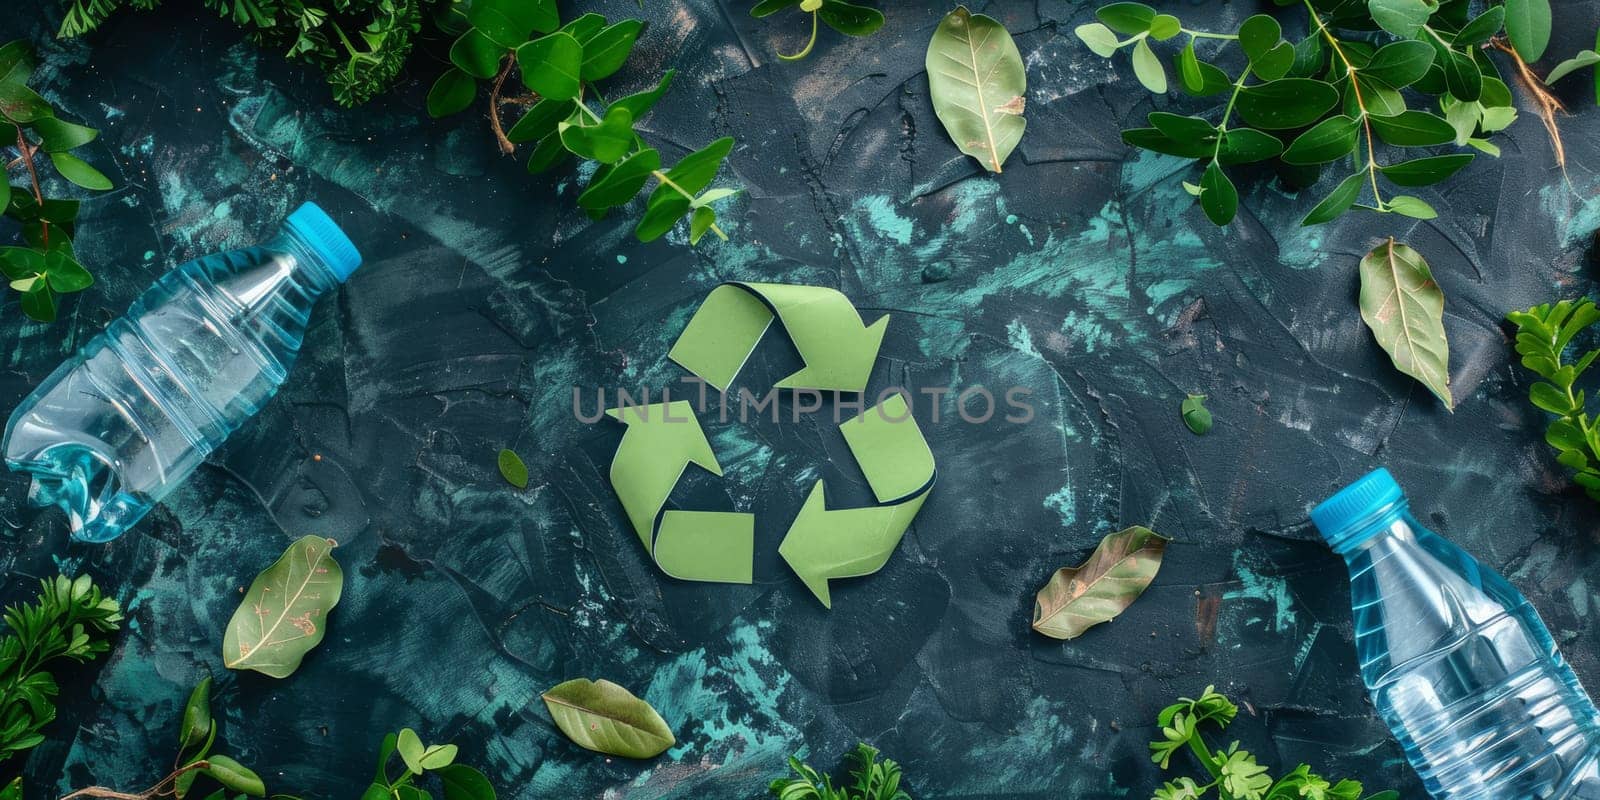 Eco-friendly habits and sustainable living solutions, such as recycling, composting, using renewable energy, or shopping locally, encouraging viewers to adopt more environmentally conscious behaviors by Kadula